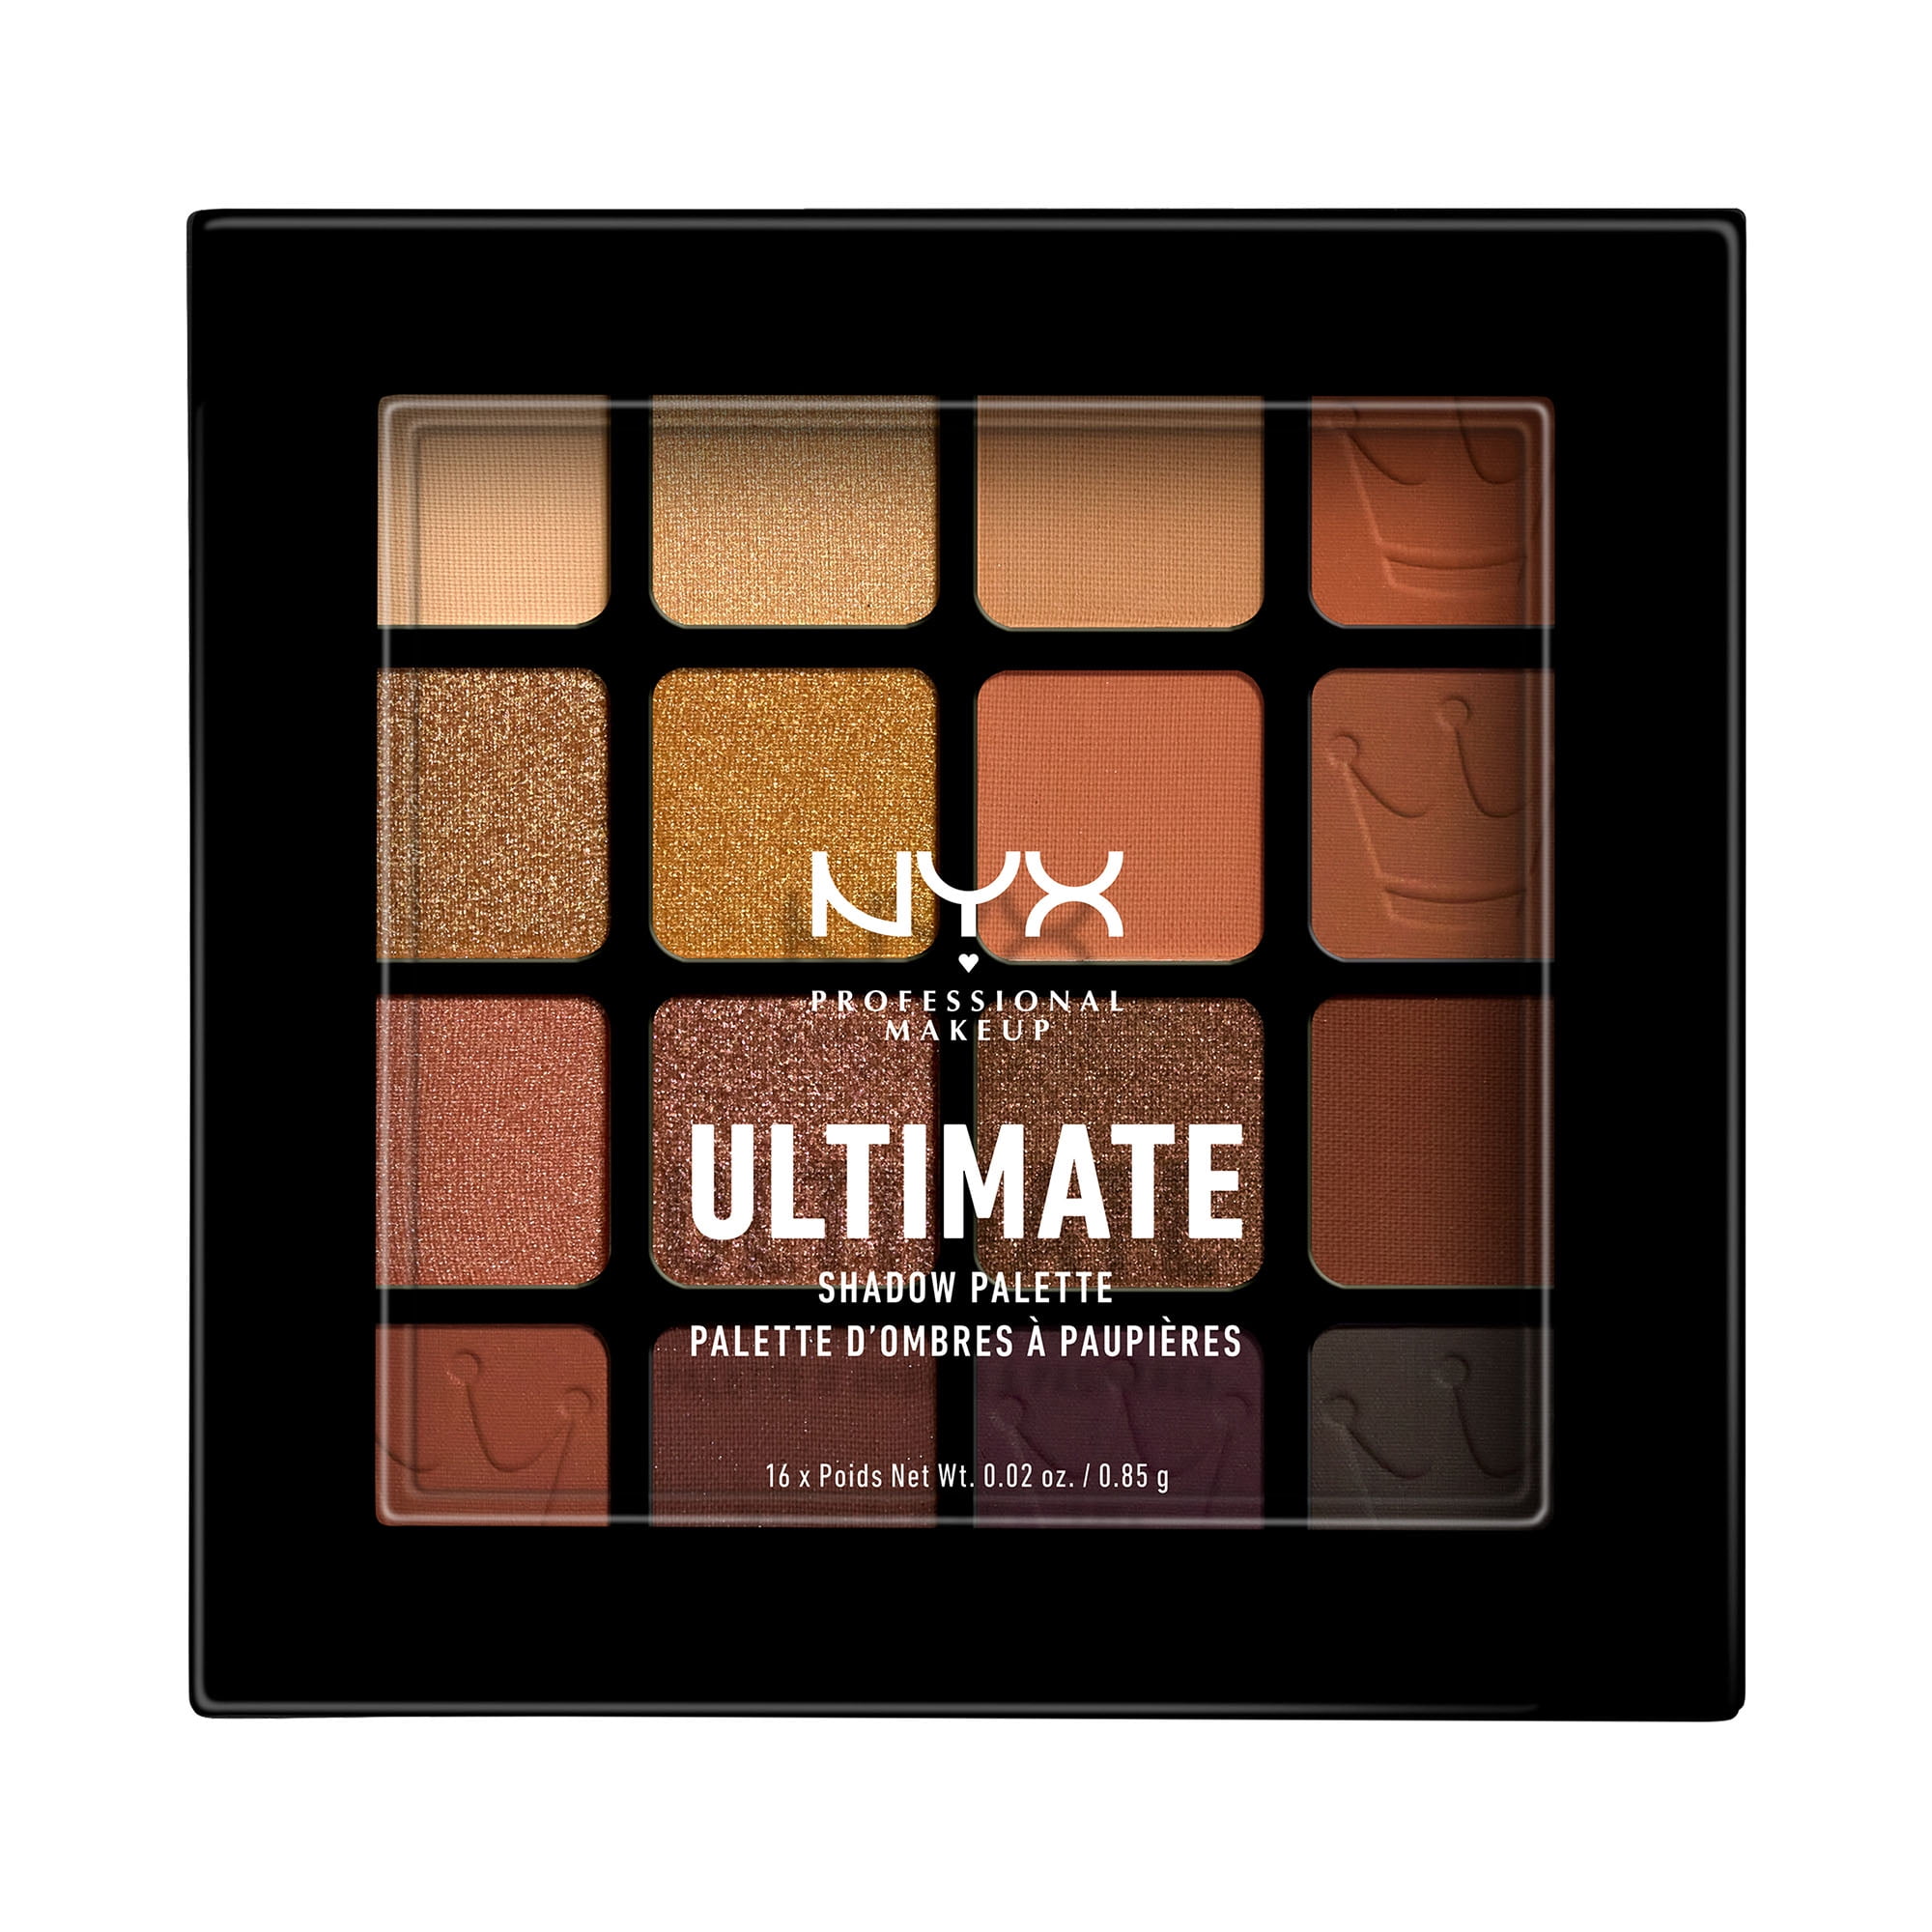 NYX Professional Makeup Ultimate Eye Shadow Palette, Brights, 0.32 oz -